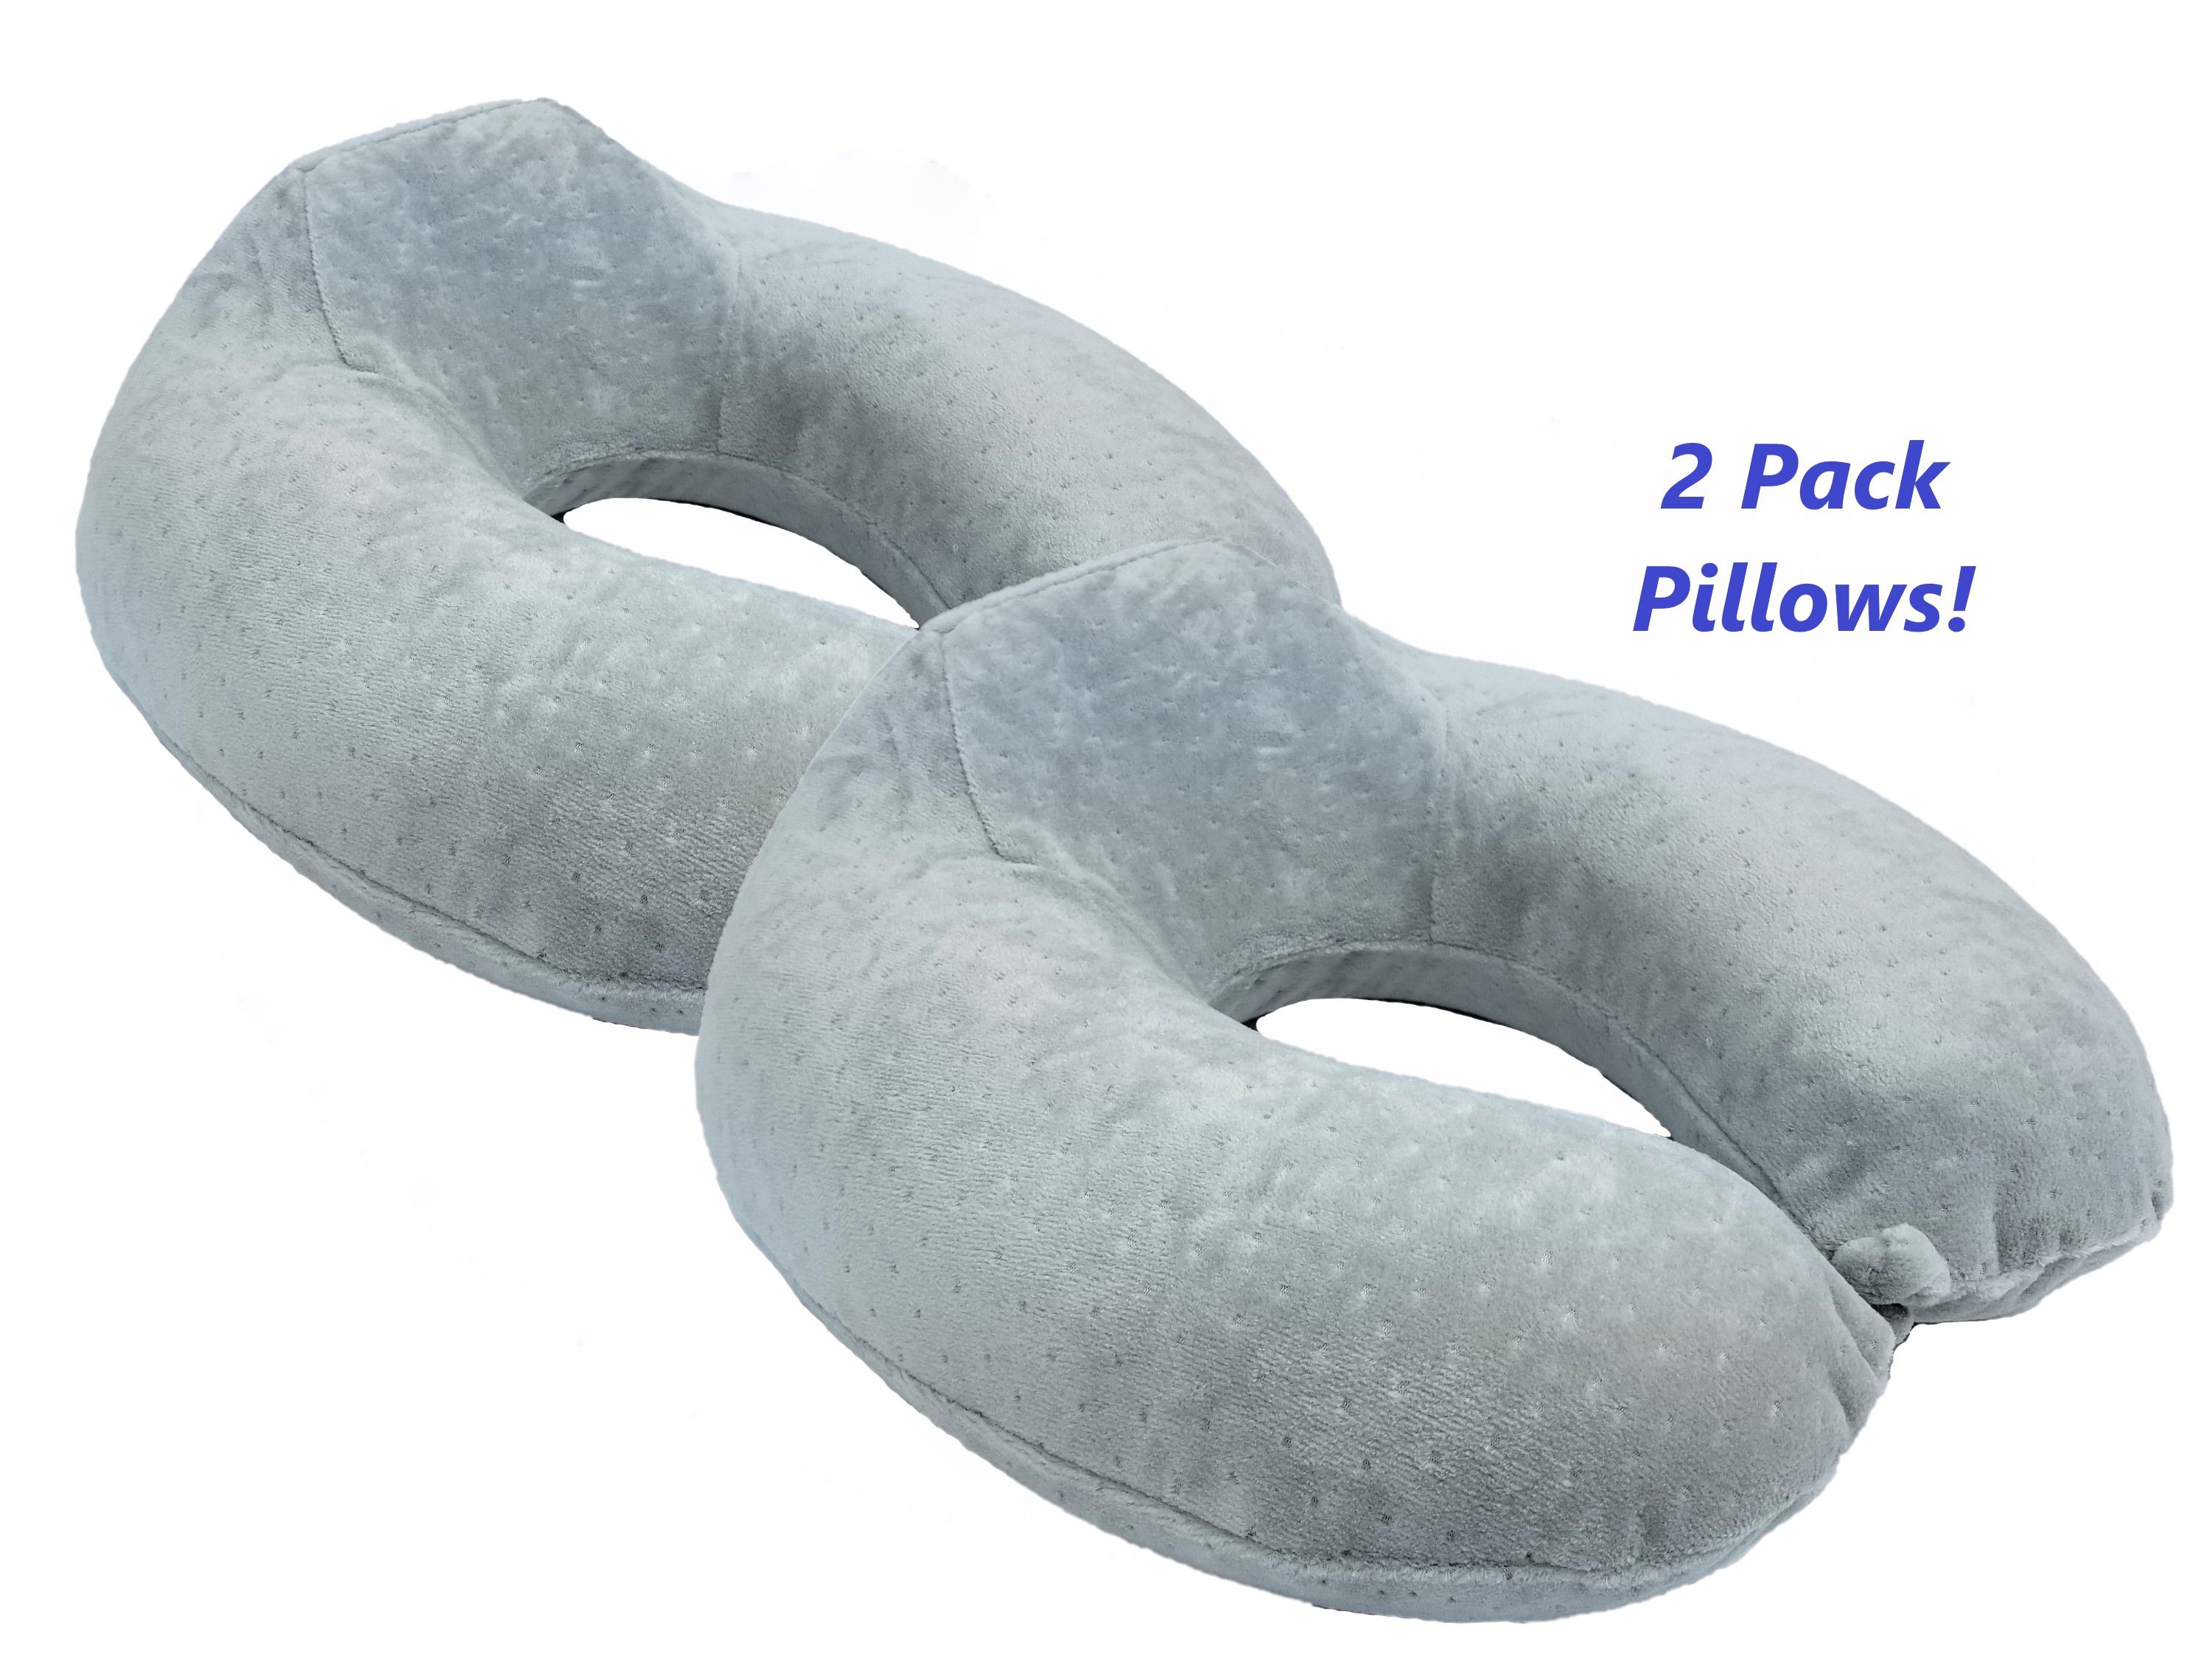 Bookishbunny 2 Pack Elevated Large Neck Support Memory Foam U Shape Travel Pillow Airplane Cushion - image 1 of 6